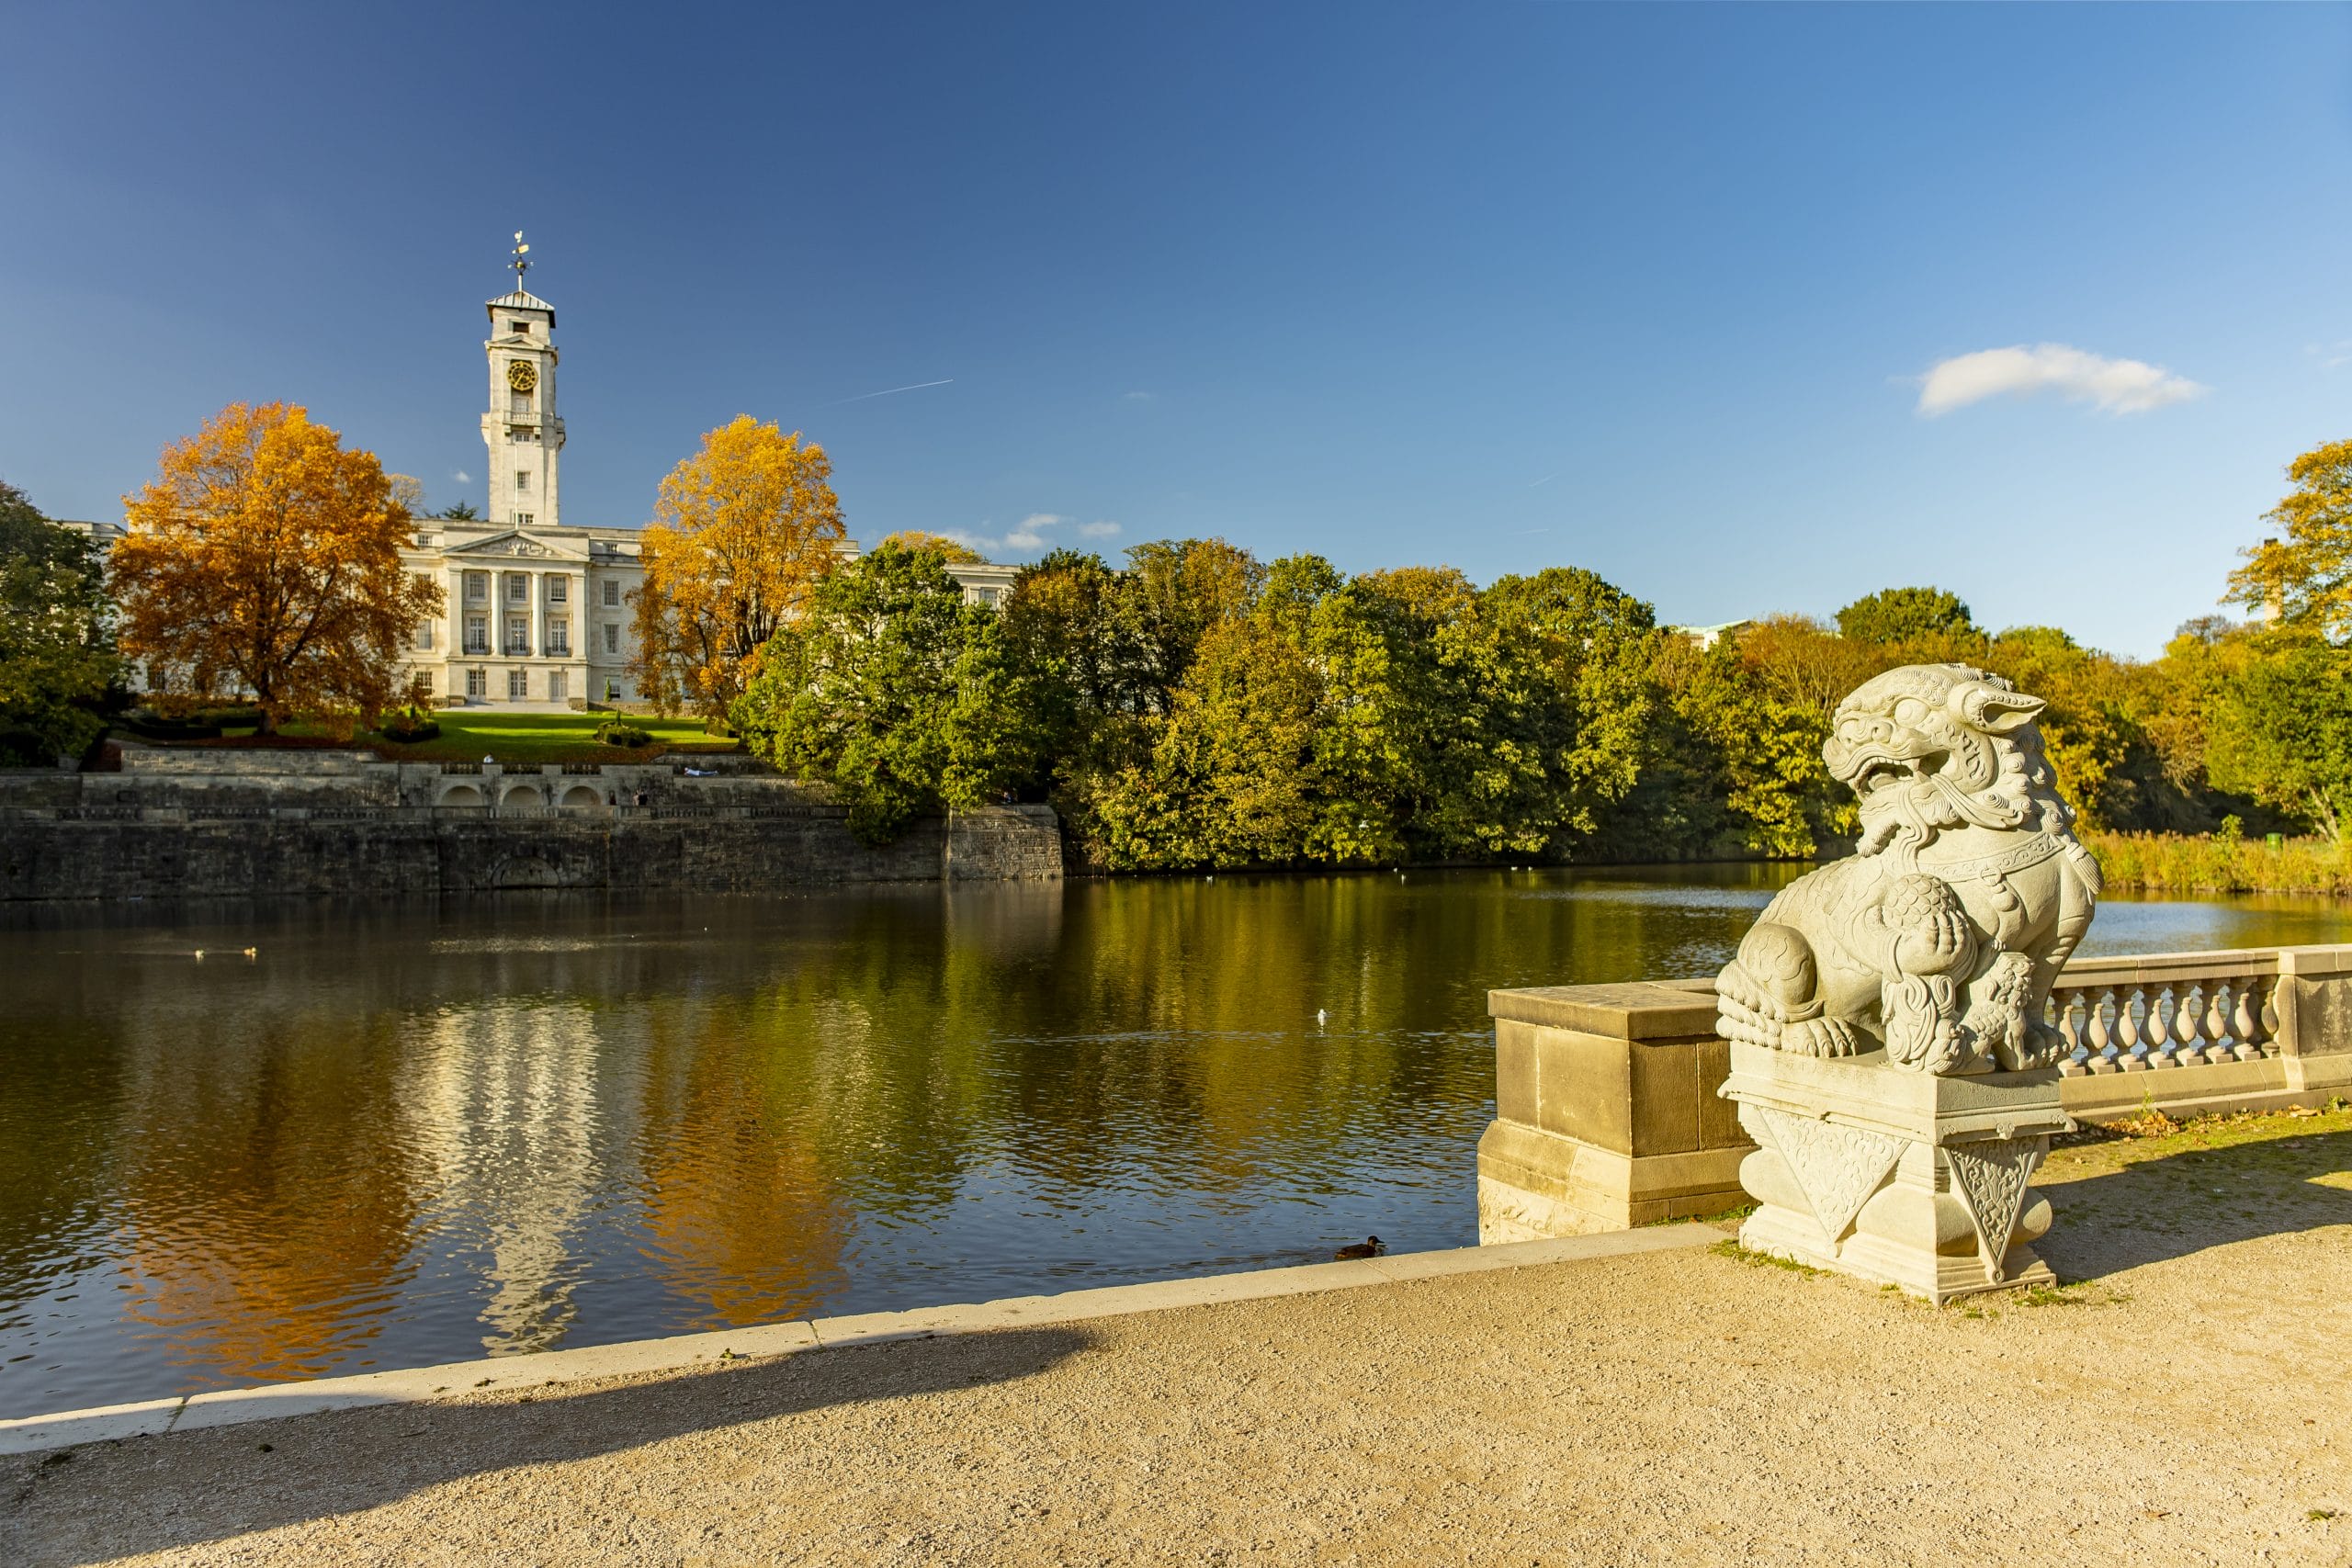 Autumnal trees reflect on a lake with a tall clock tower in the background and a stone lion in the foreground